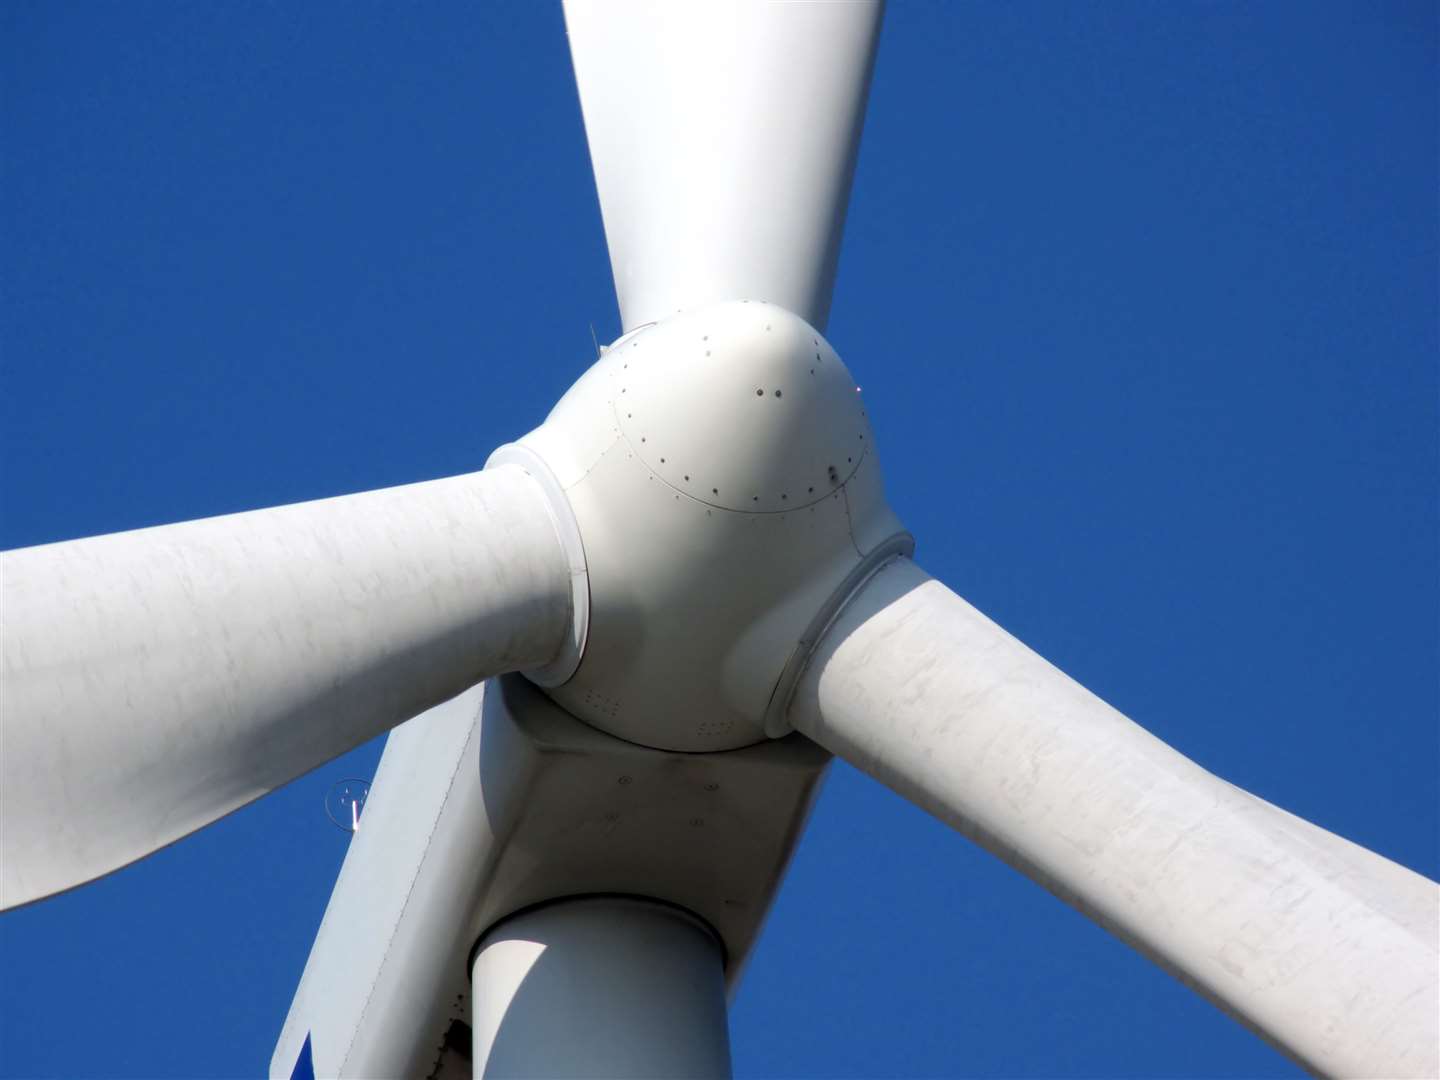 Bettyhill Wind Farm has two turbines and now 11 more are proposed.